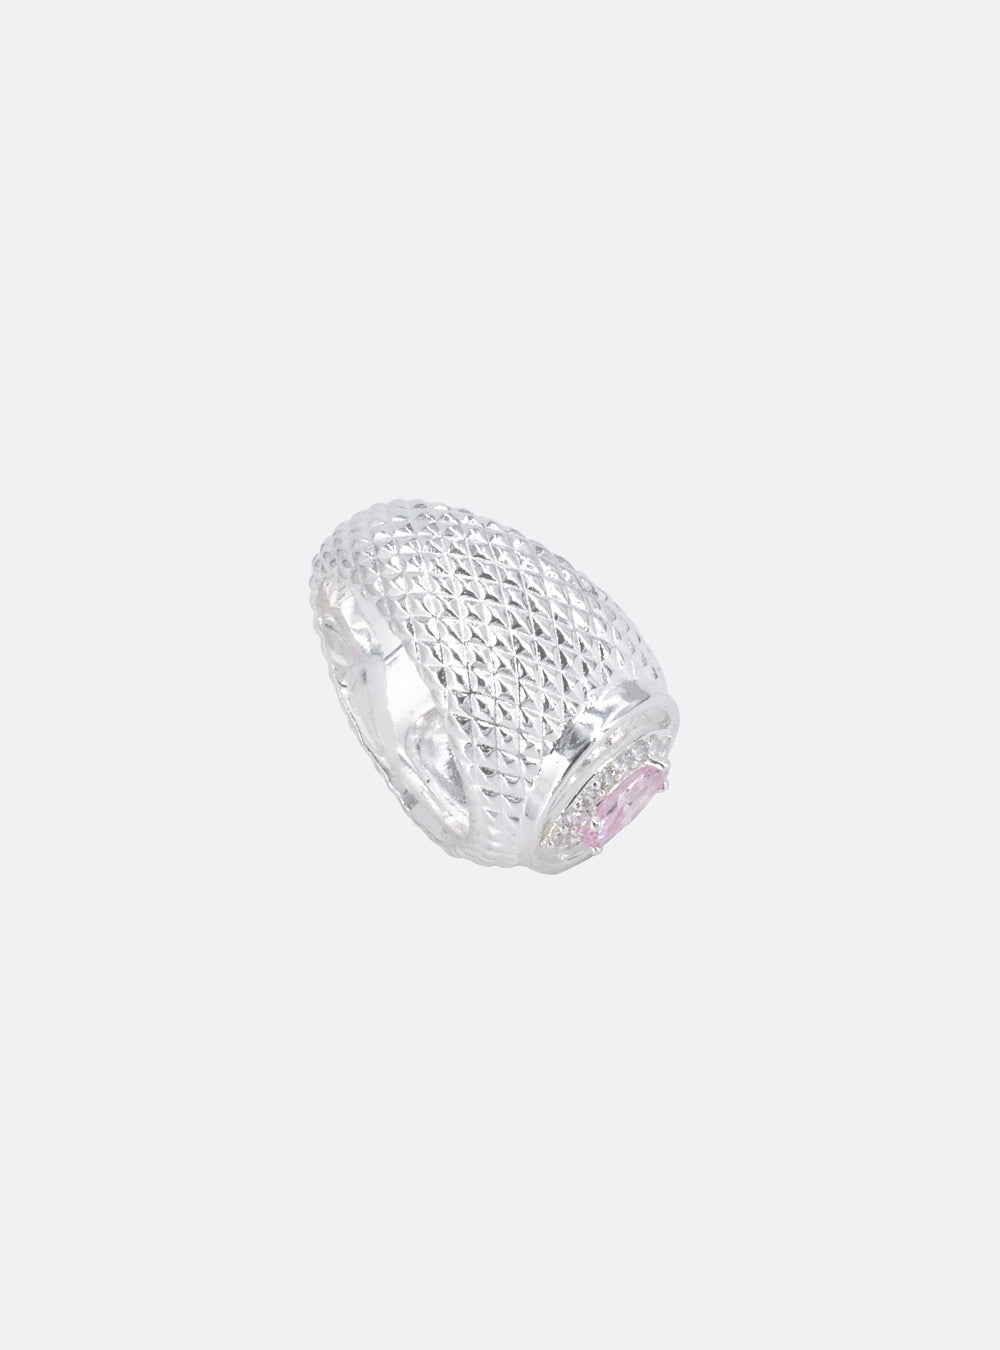 A MIDNIGHTFACTORY cat-eye cutout cocktail signet ring with pink stones on a white background.